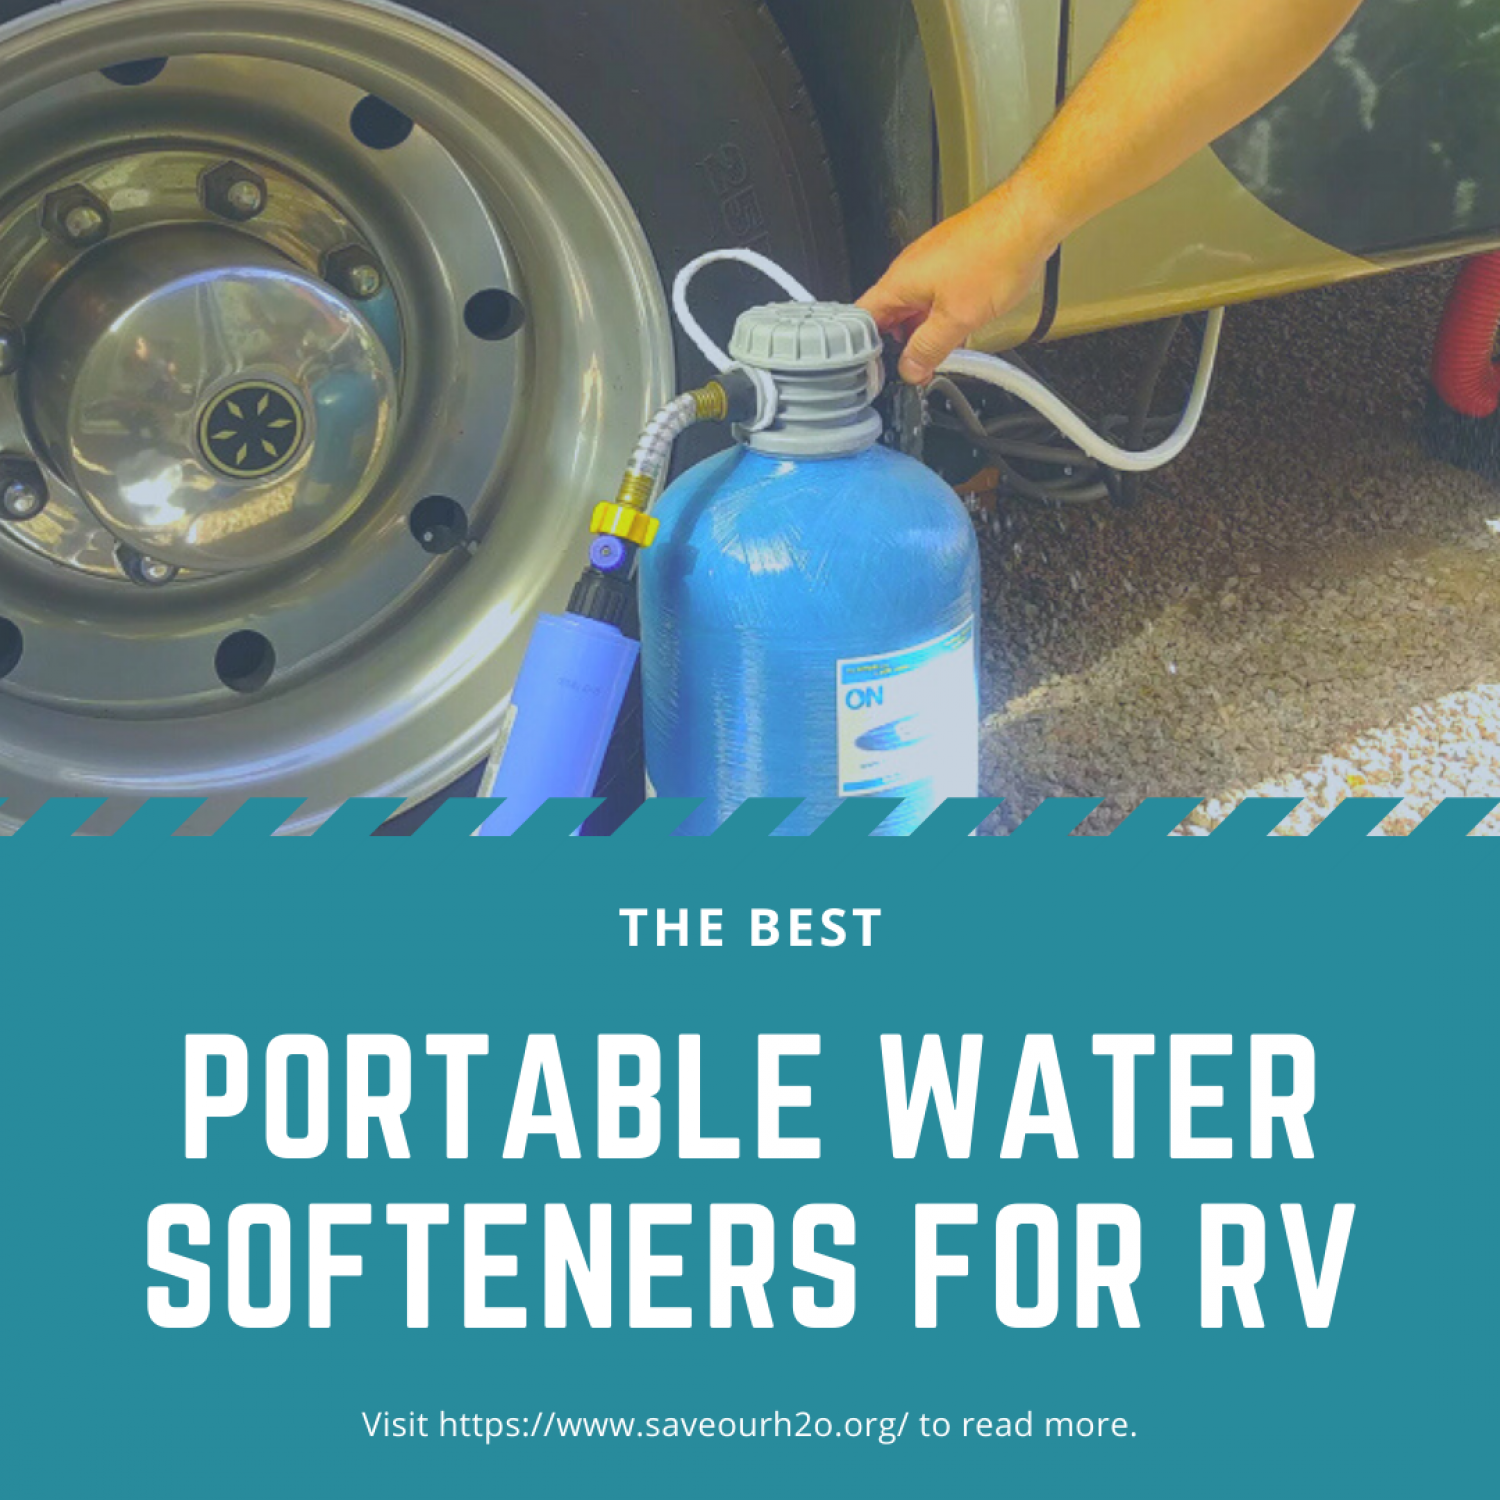 The Best Portable Water Softeners for RV for 2020 Infographic